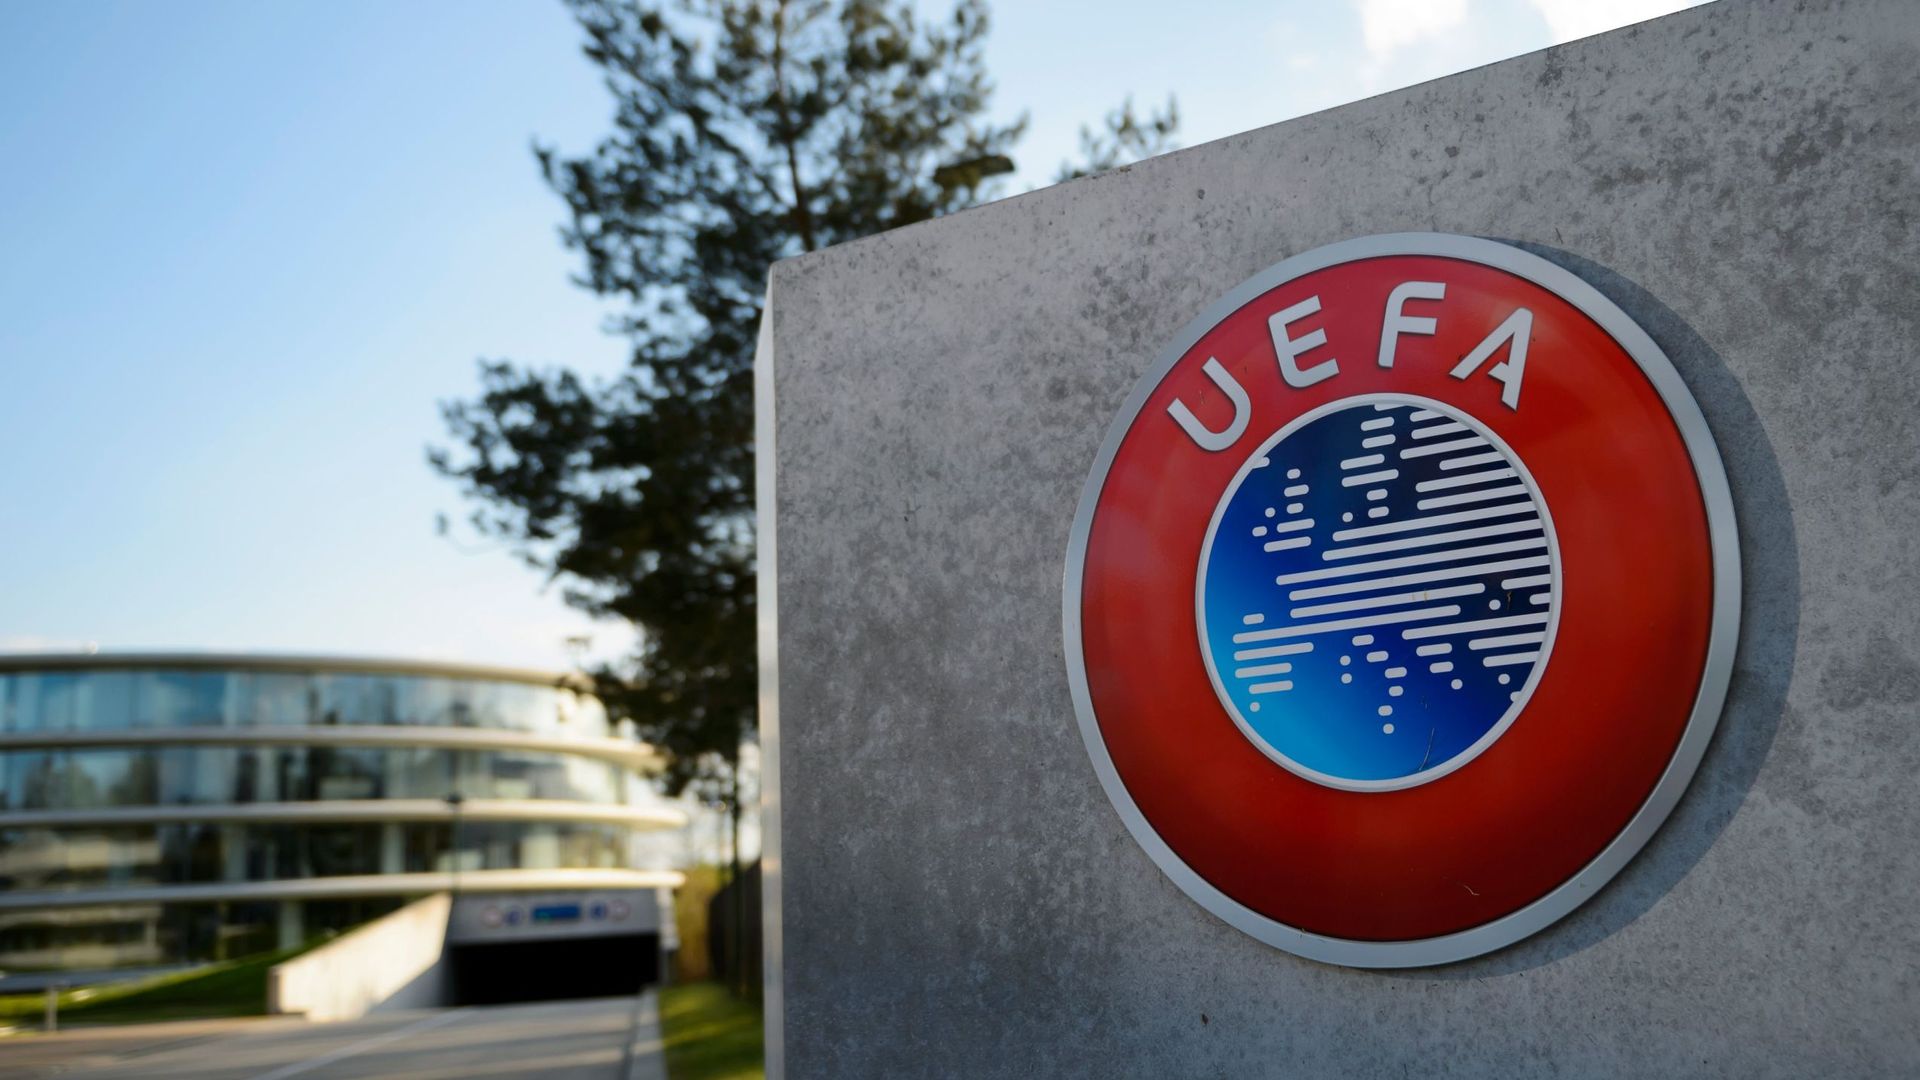 UEFA releases funds to all associations